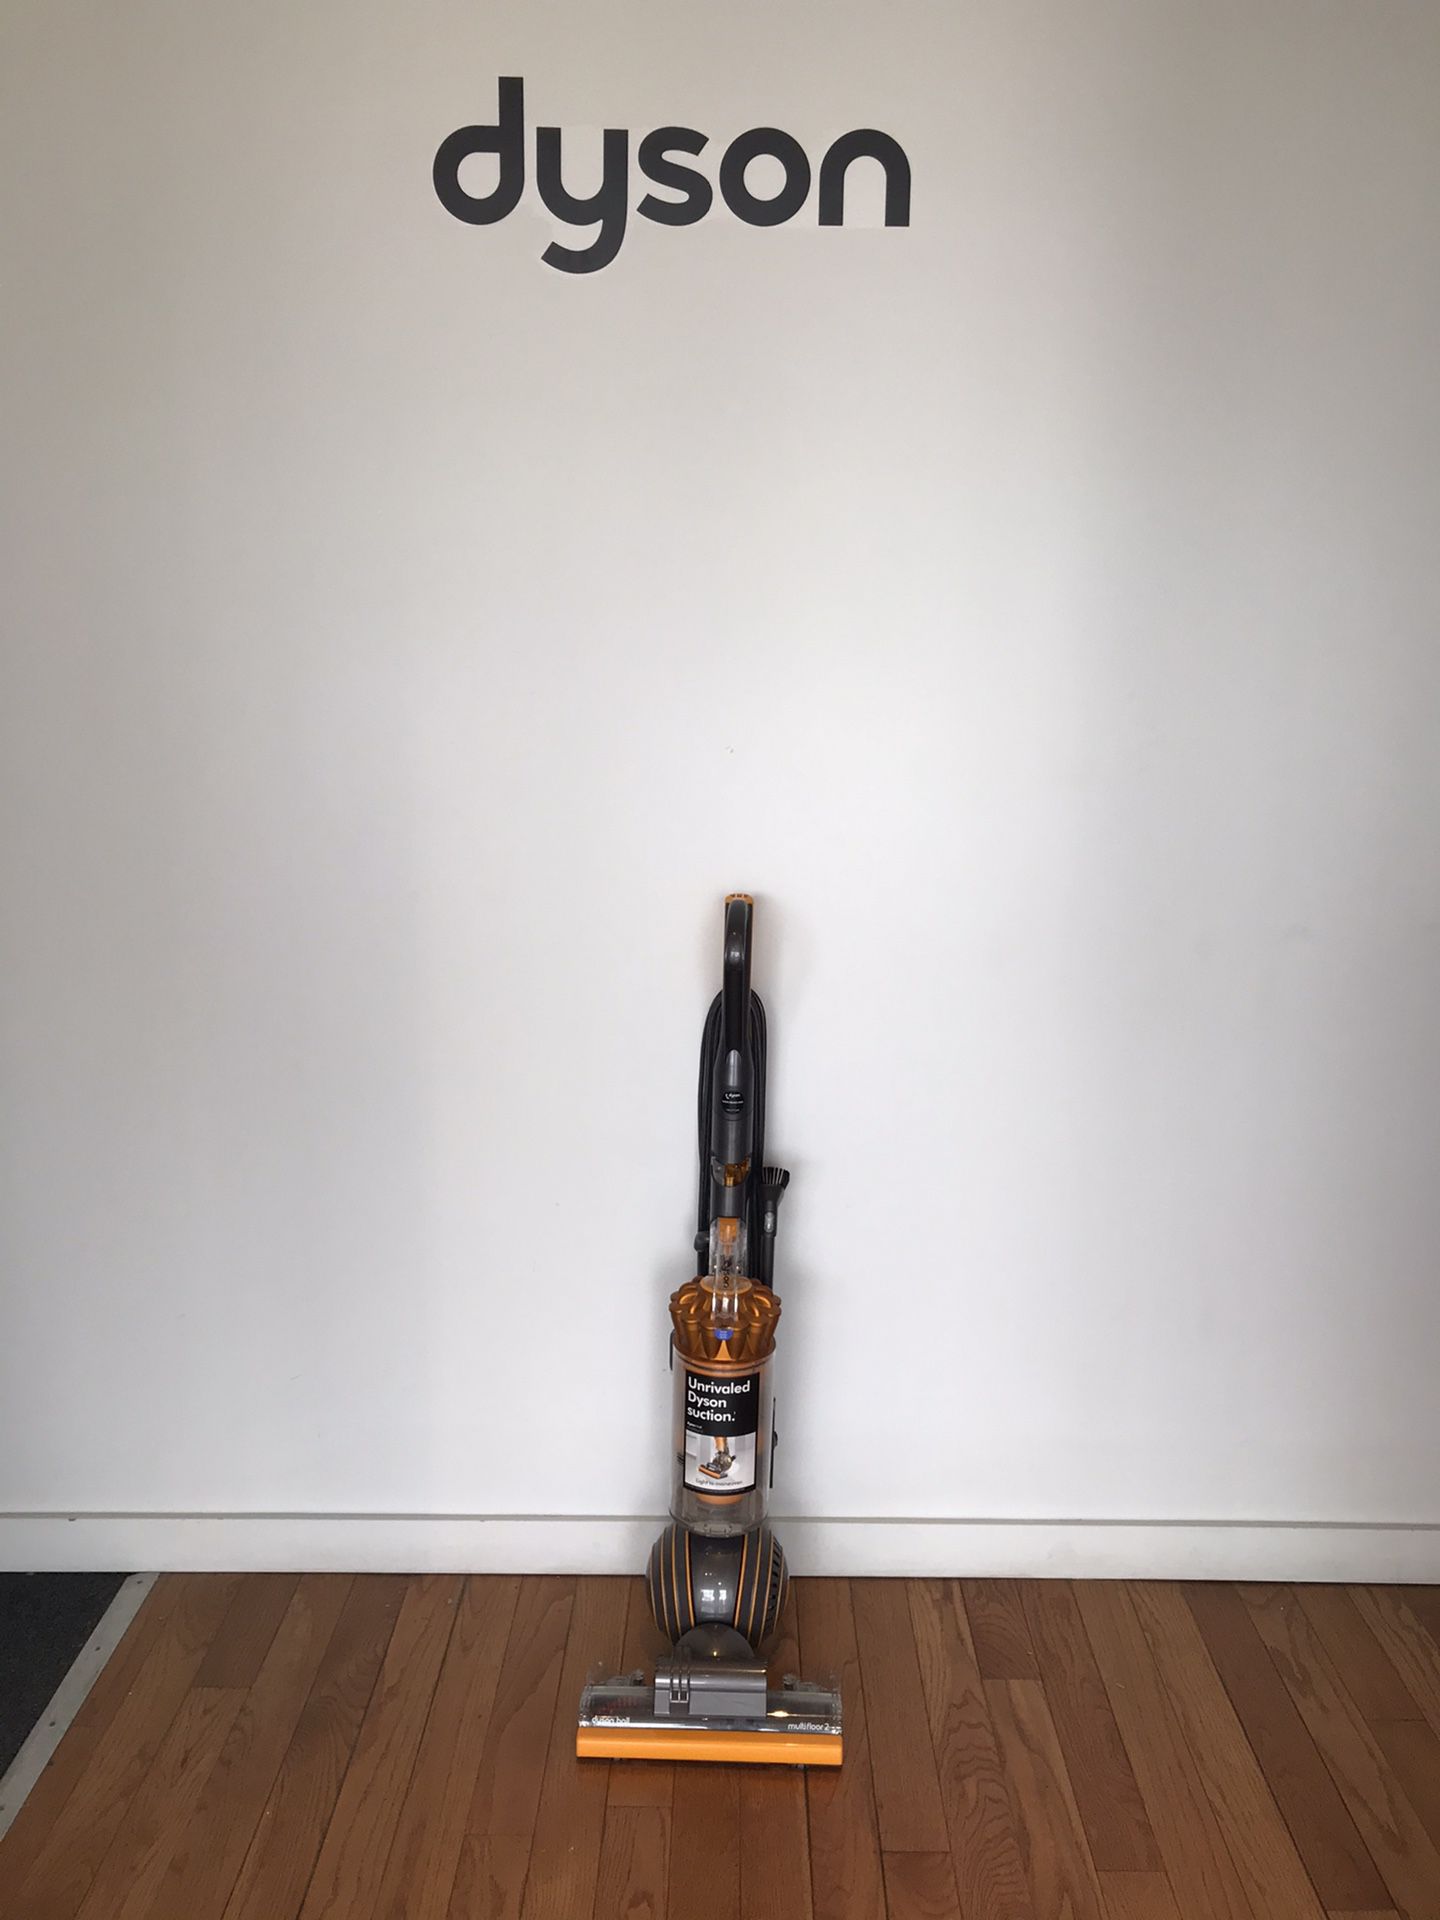 dyson vacuum uv 19 multi floor 2 -like new - and. still has a 2 year warranty attached